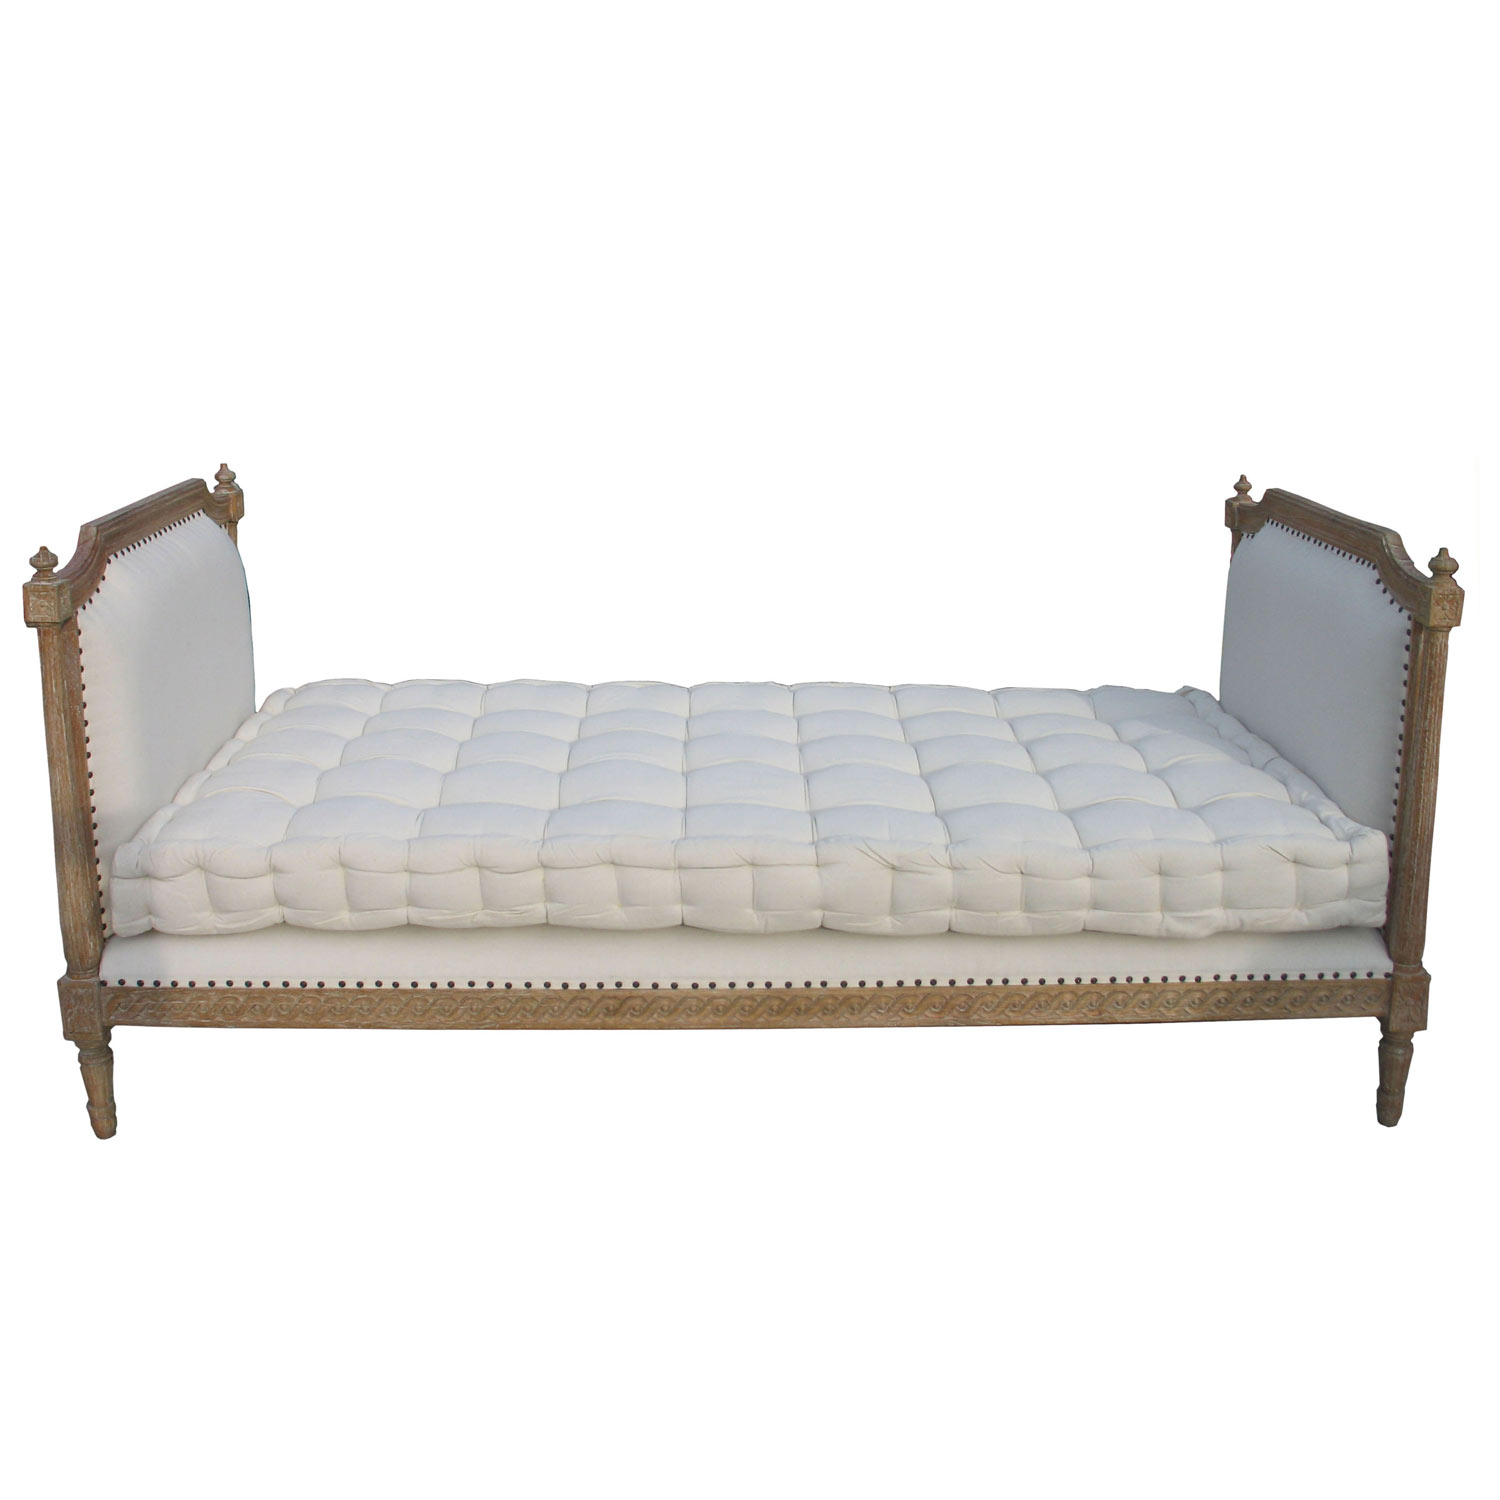 Layla Grayce Noir Isabelle Daybed